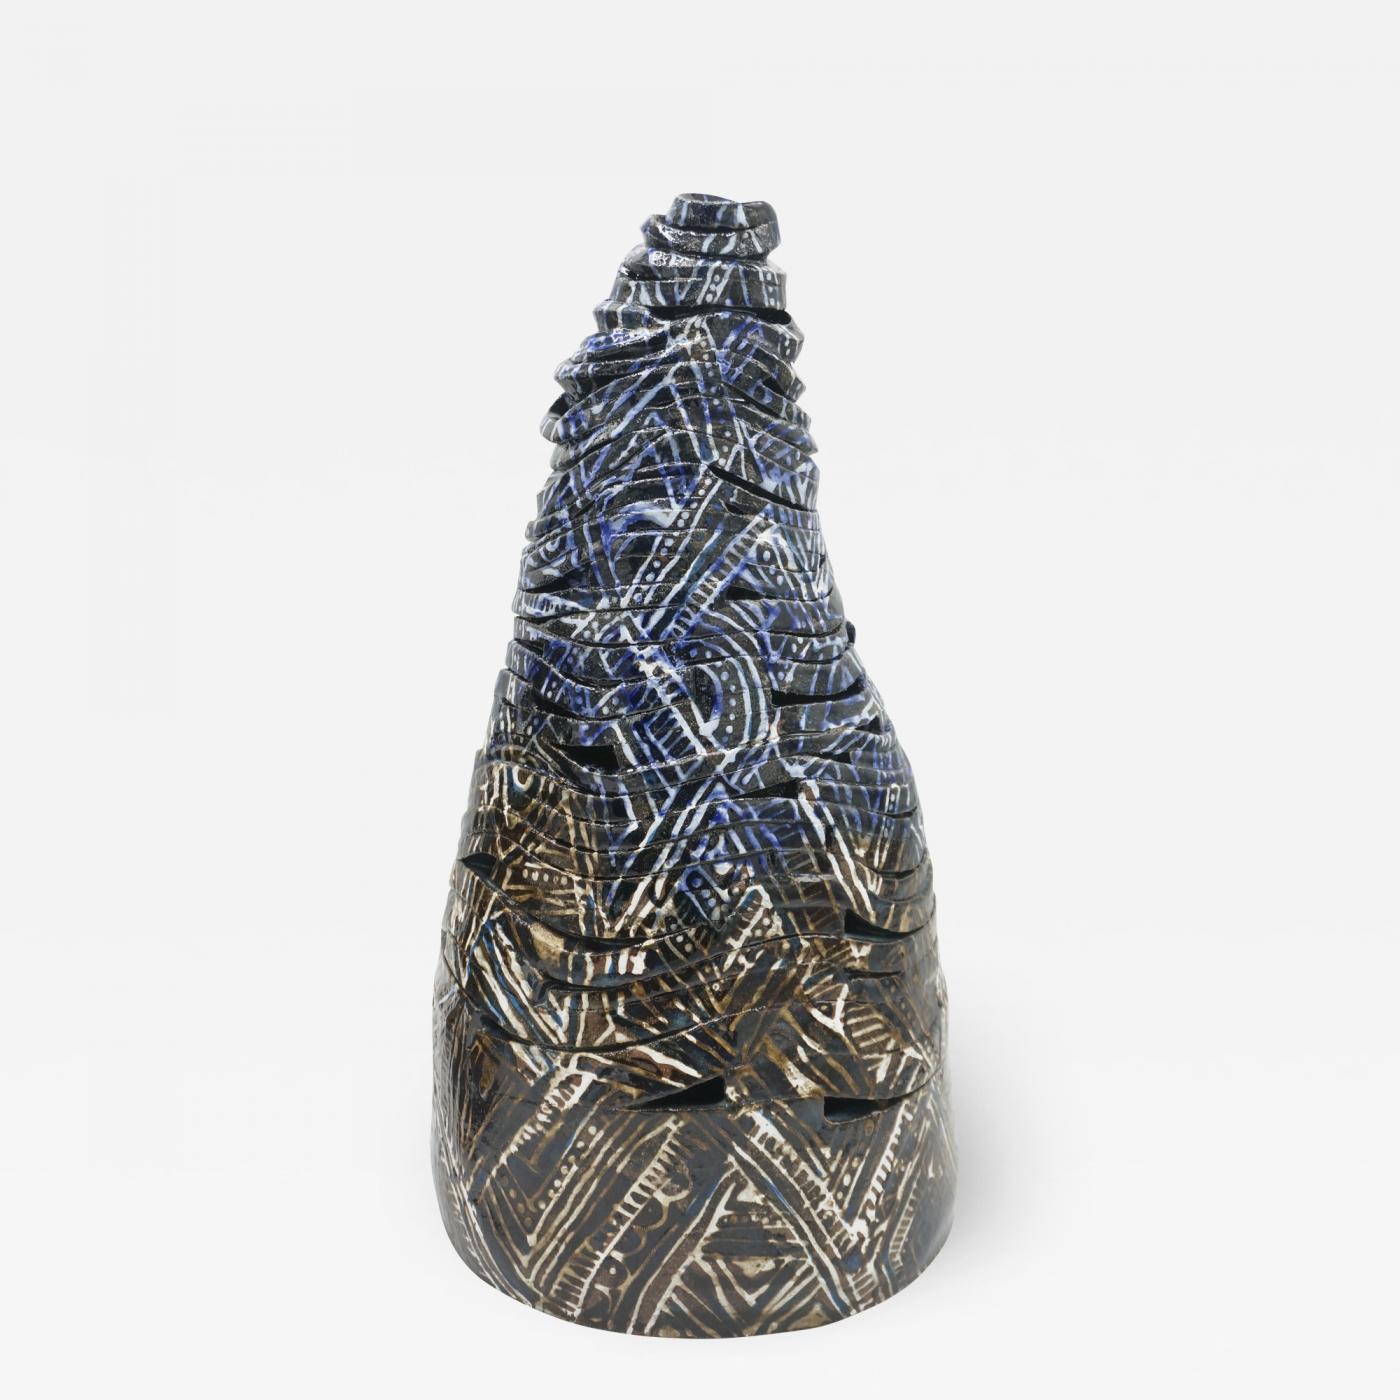 Cone shaped ceramic sculpture in the form of spiraling ribbon or cloth patterned with brown and blue motifs.